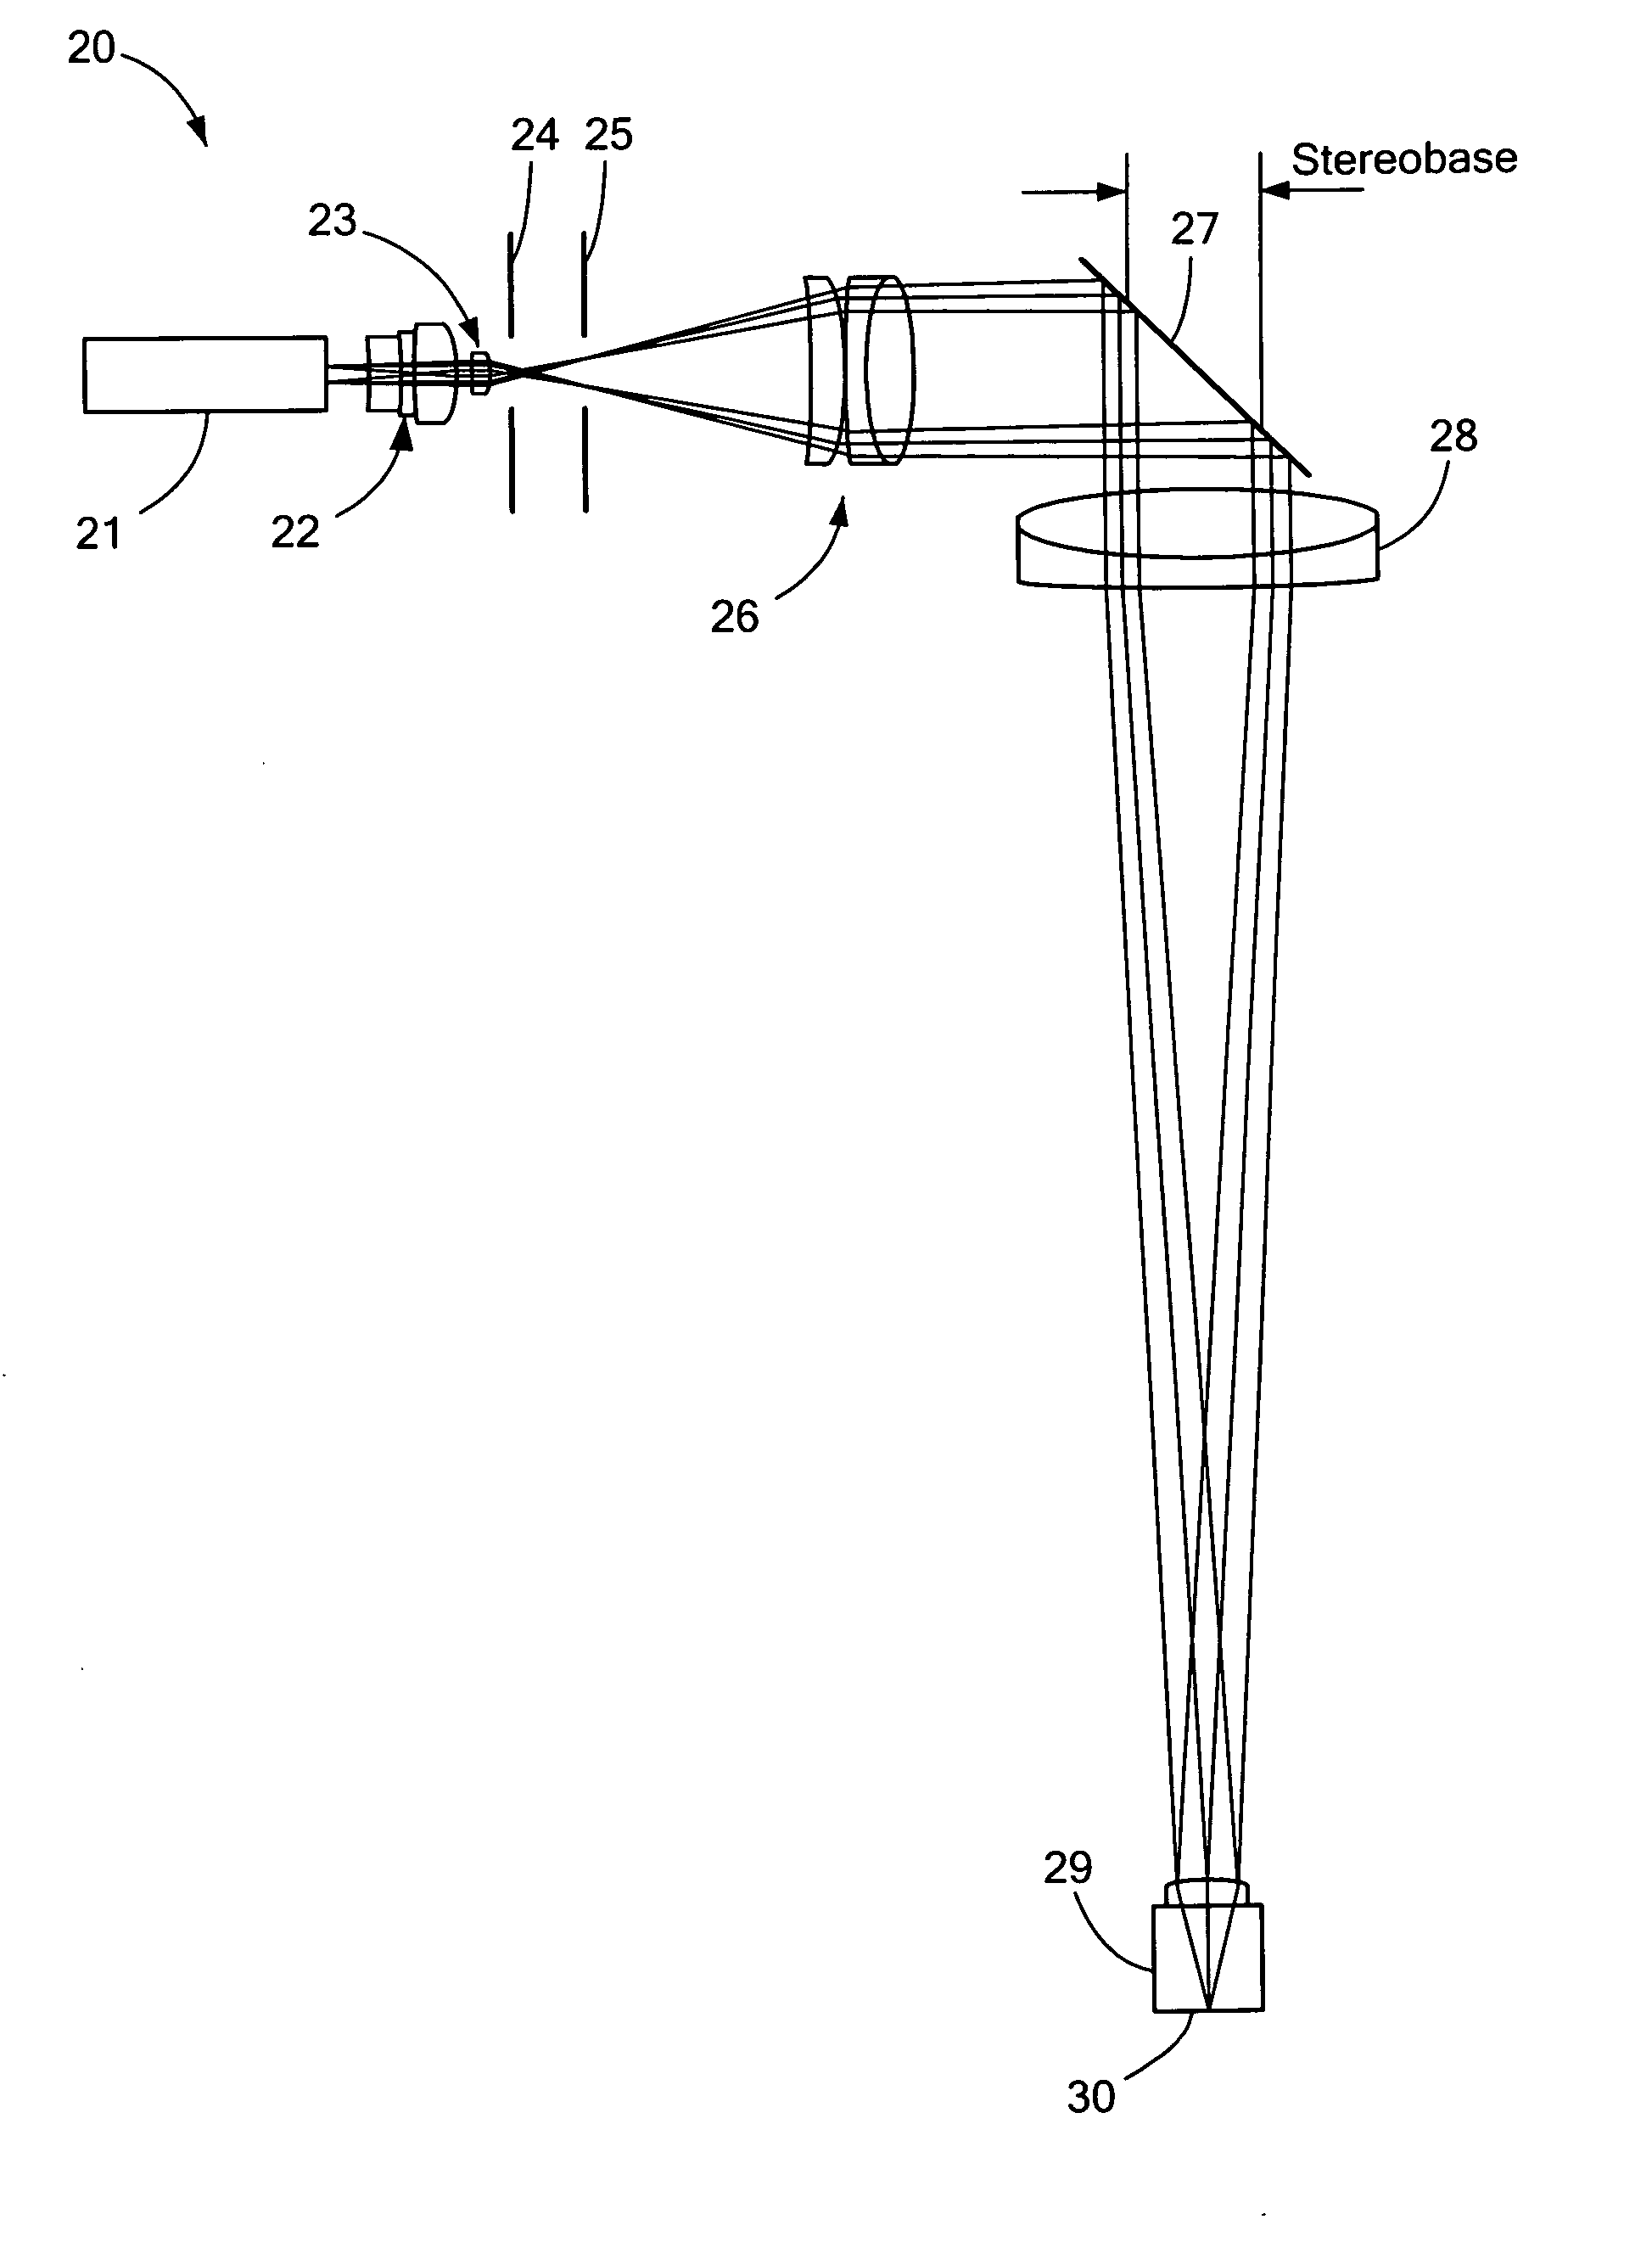 Illumination device as well as observation device